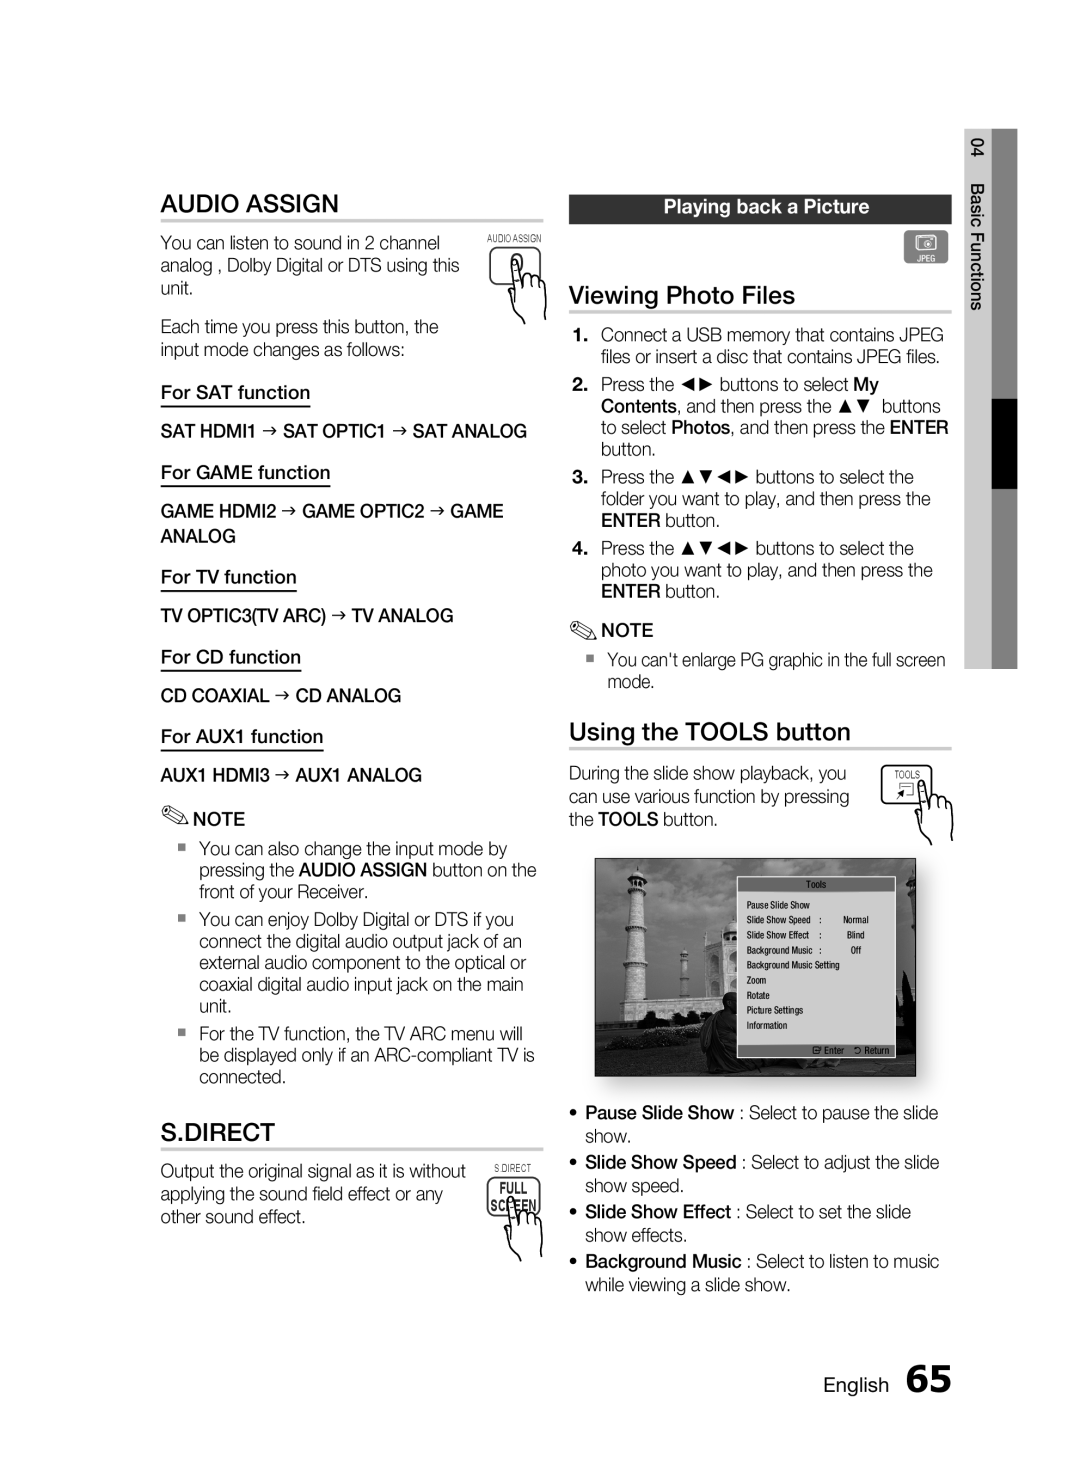 Samsung HW-D7000 user manual Audio Assign, S.Direct, Viewing Photo Files, Using the TOOLS button, Playing back a Picture 